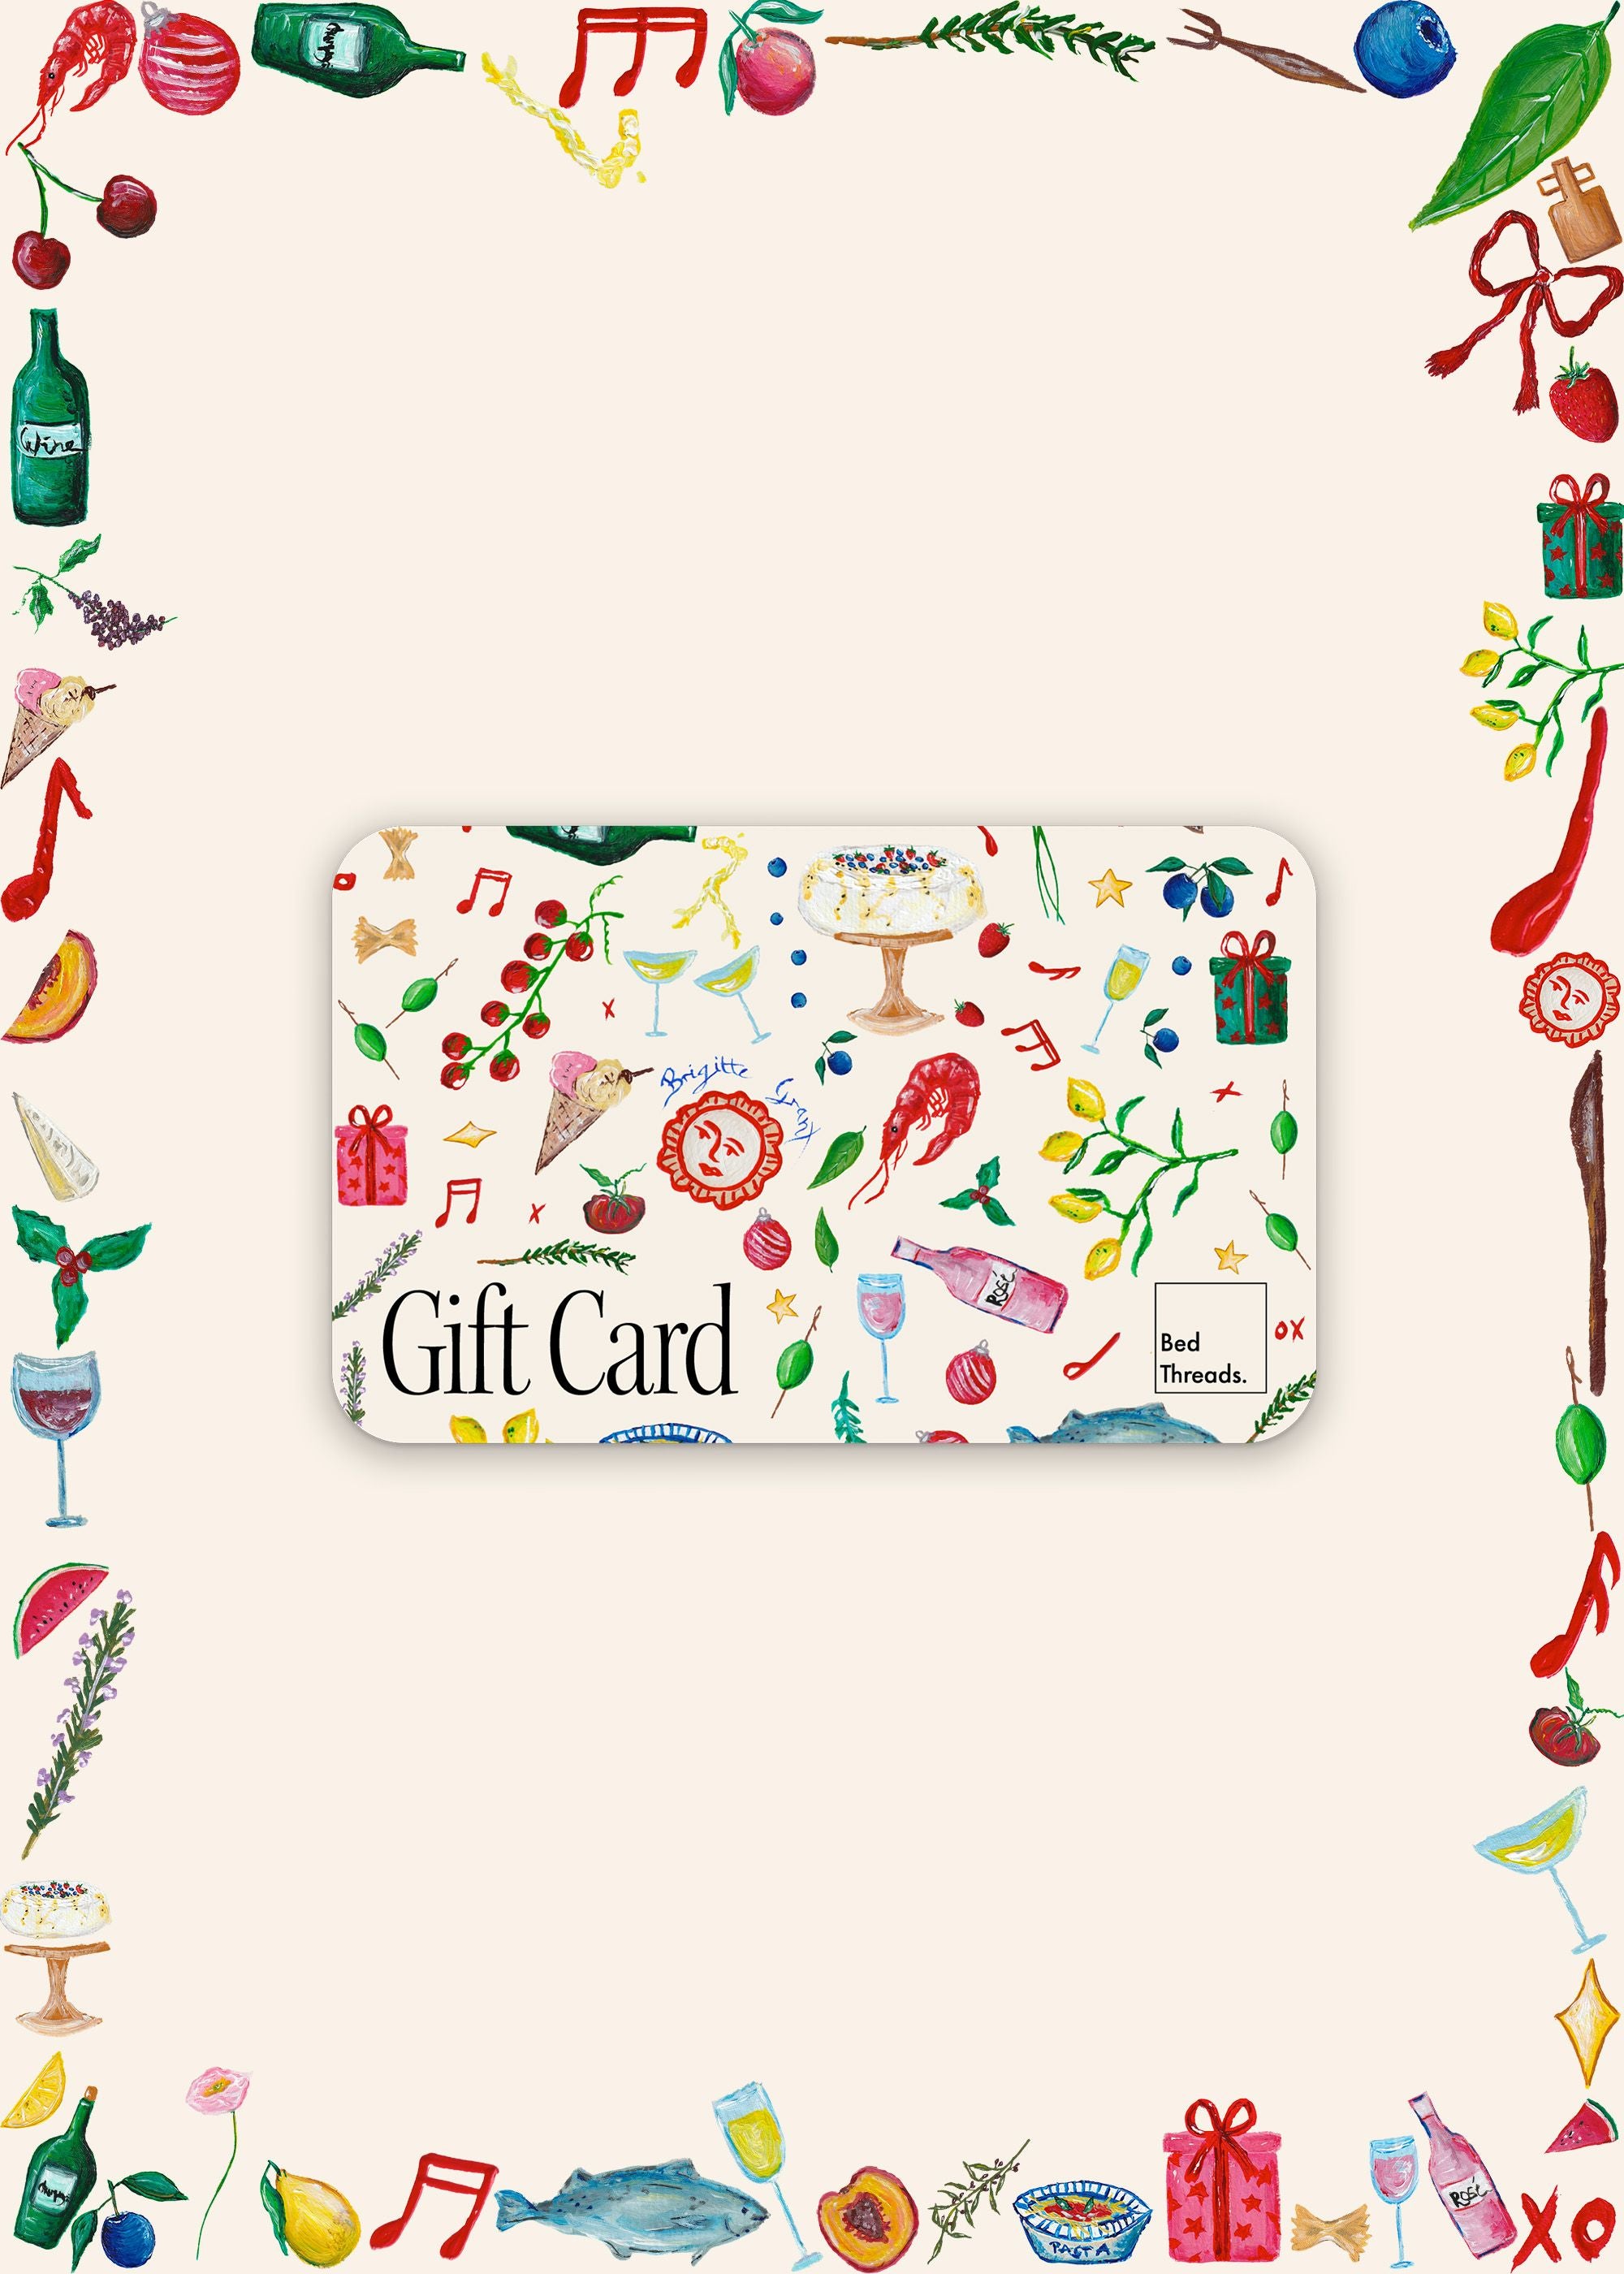 The 37 Best Gift Cards for Men